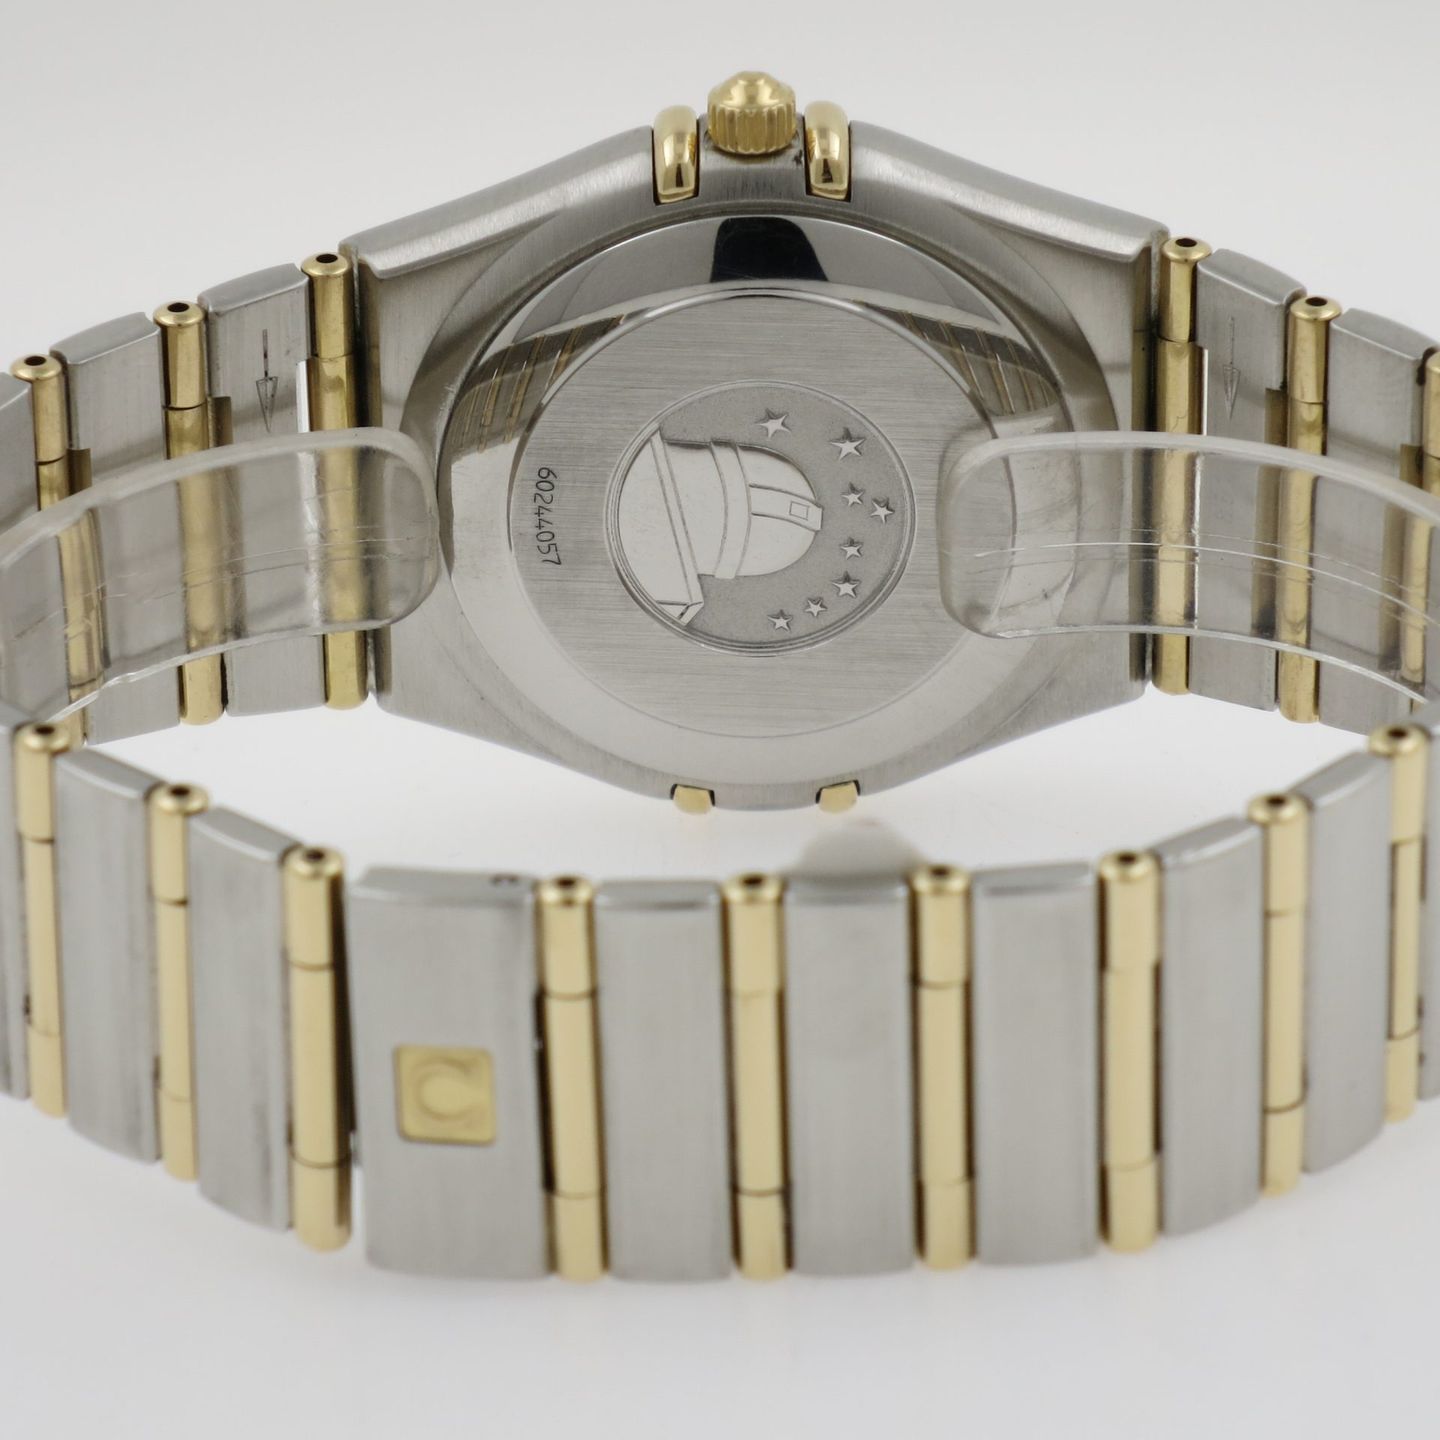 Omega Constellation 1202.1 (1998) - Gold dial 39 mm Gold/Steel case (3/4)